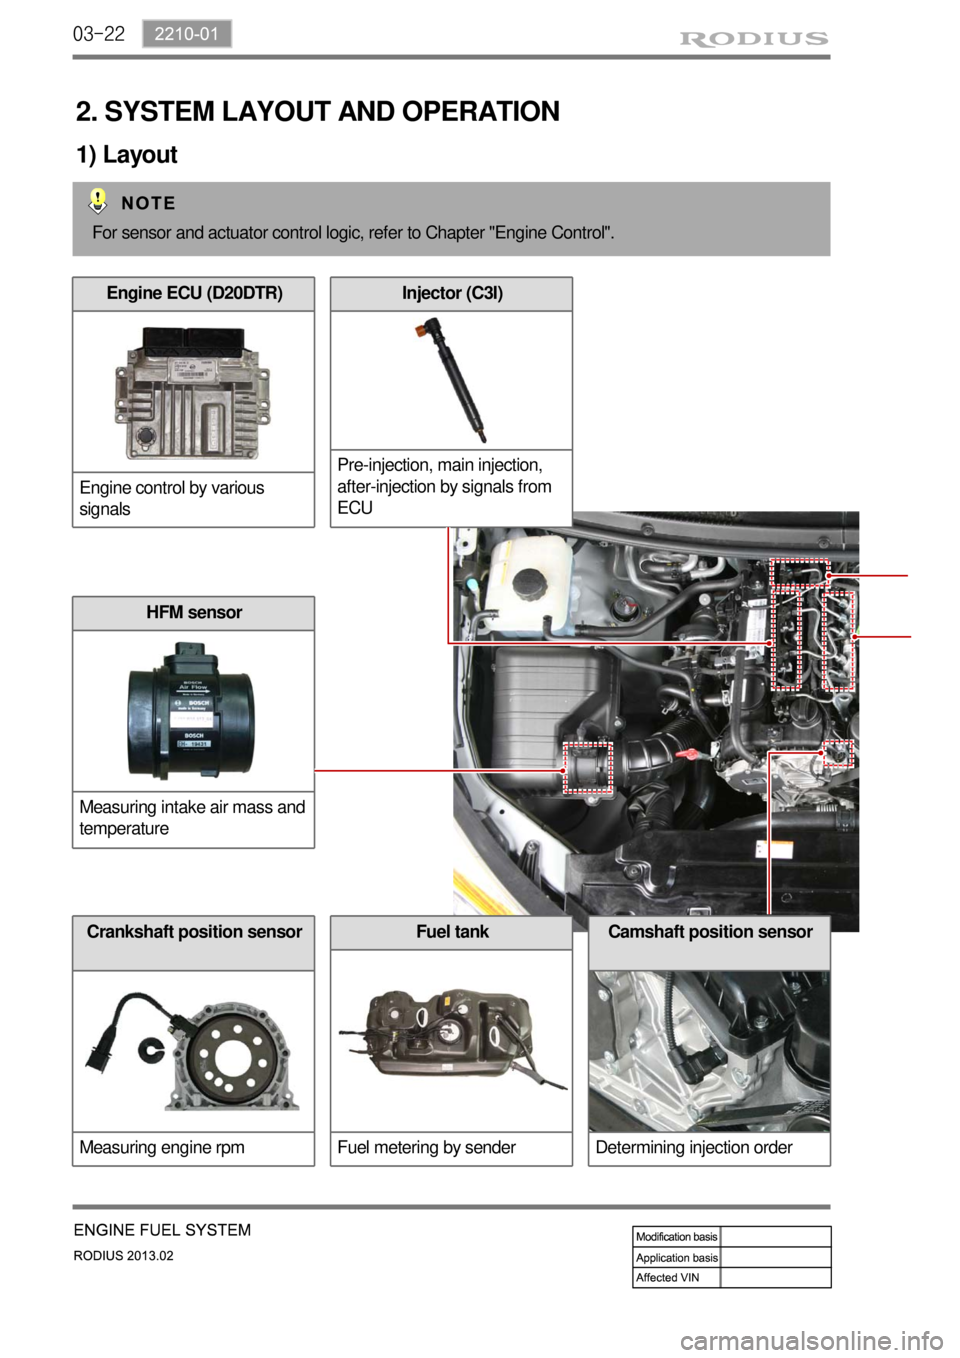 SSANGYONG TURISMO 2013  Service Manual 03-22
Camshaft position sensor
Determining injection orderFuel tank
Fuel metering by sender
2. SYSTEM LAYOUT AND OPERATION
1) Layout
For sensor and actuator control logic, refer to Chapter "Engine Con